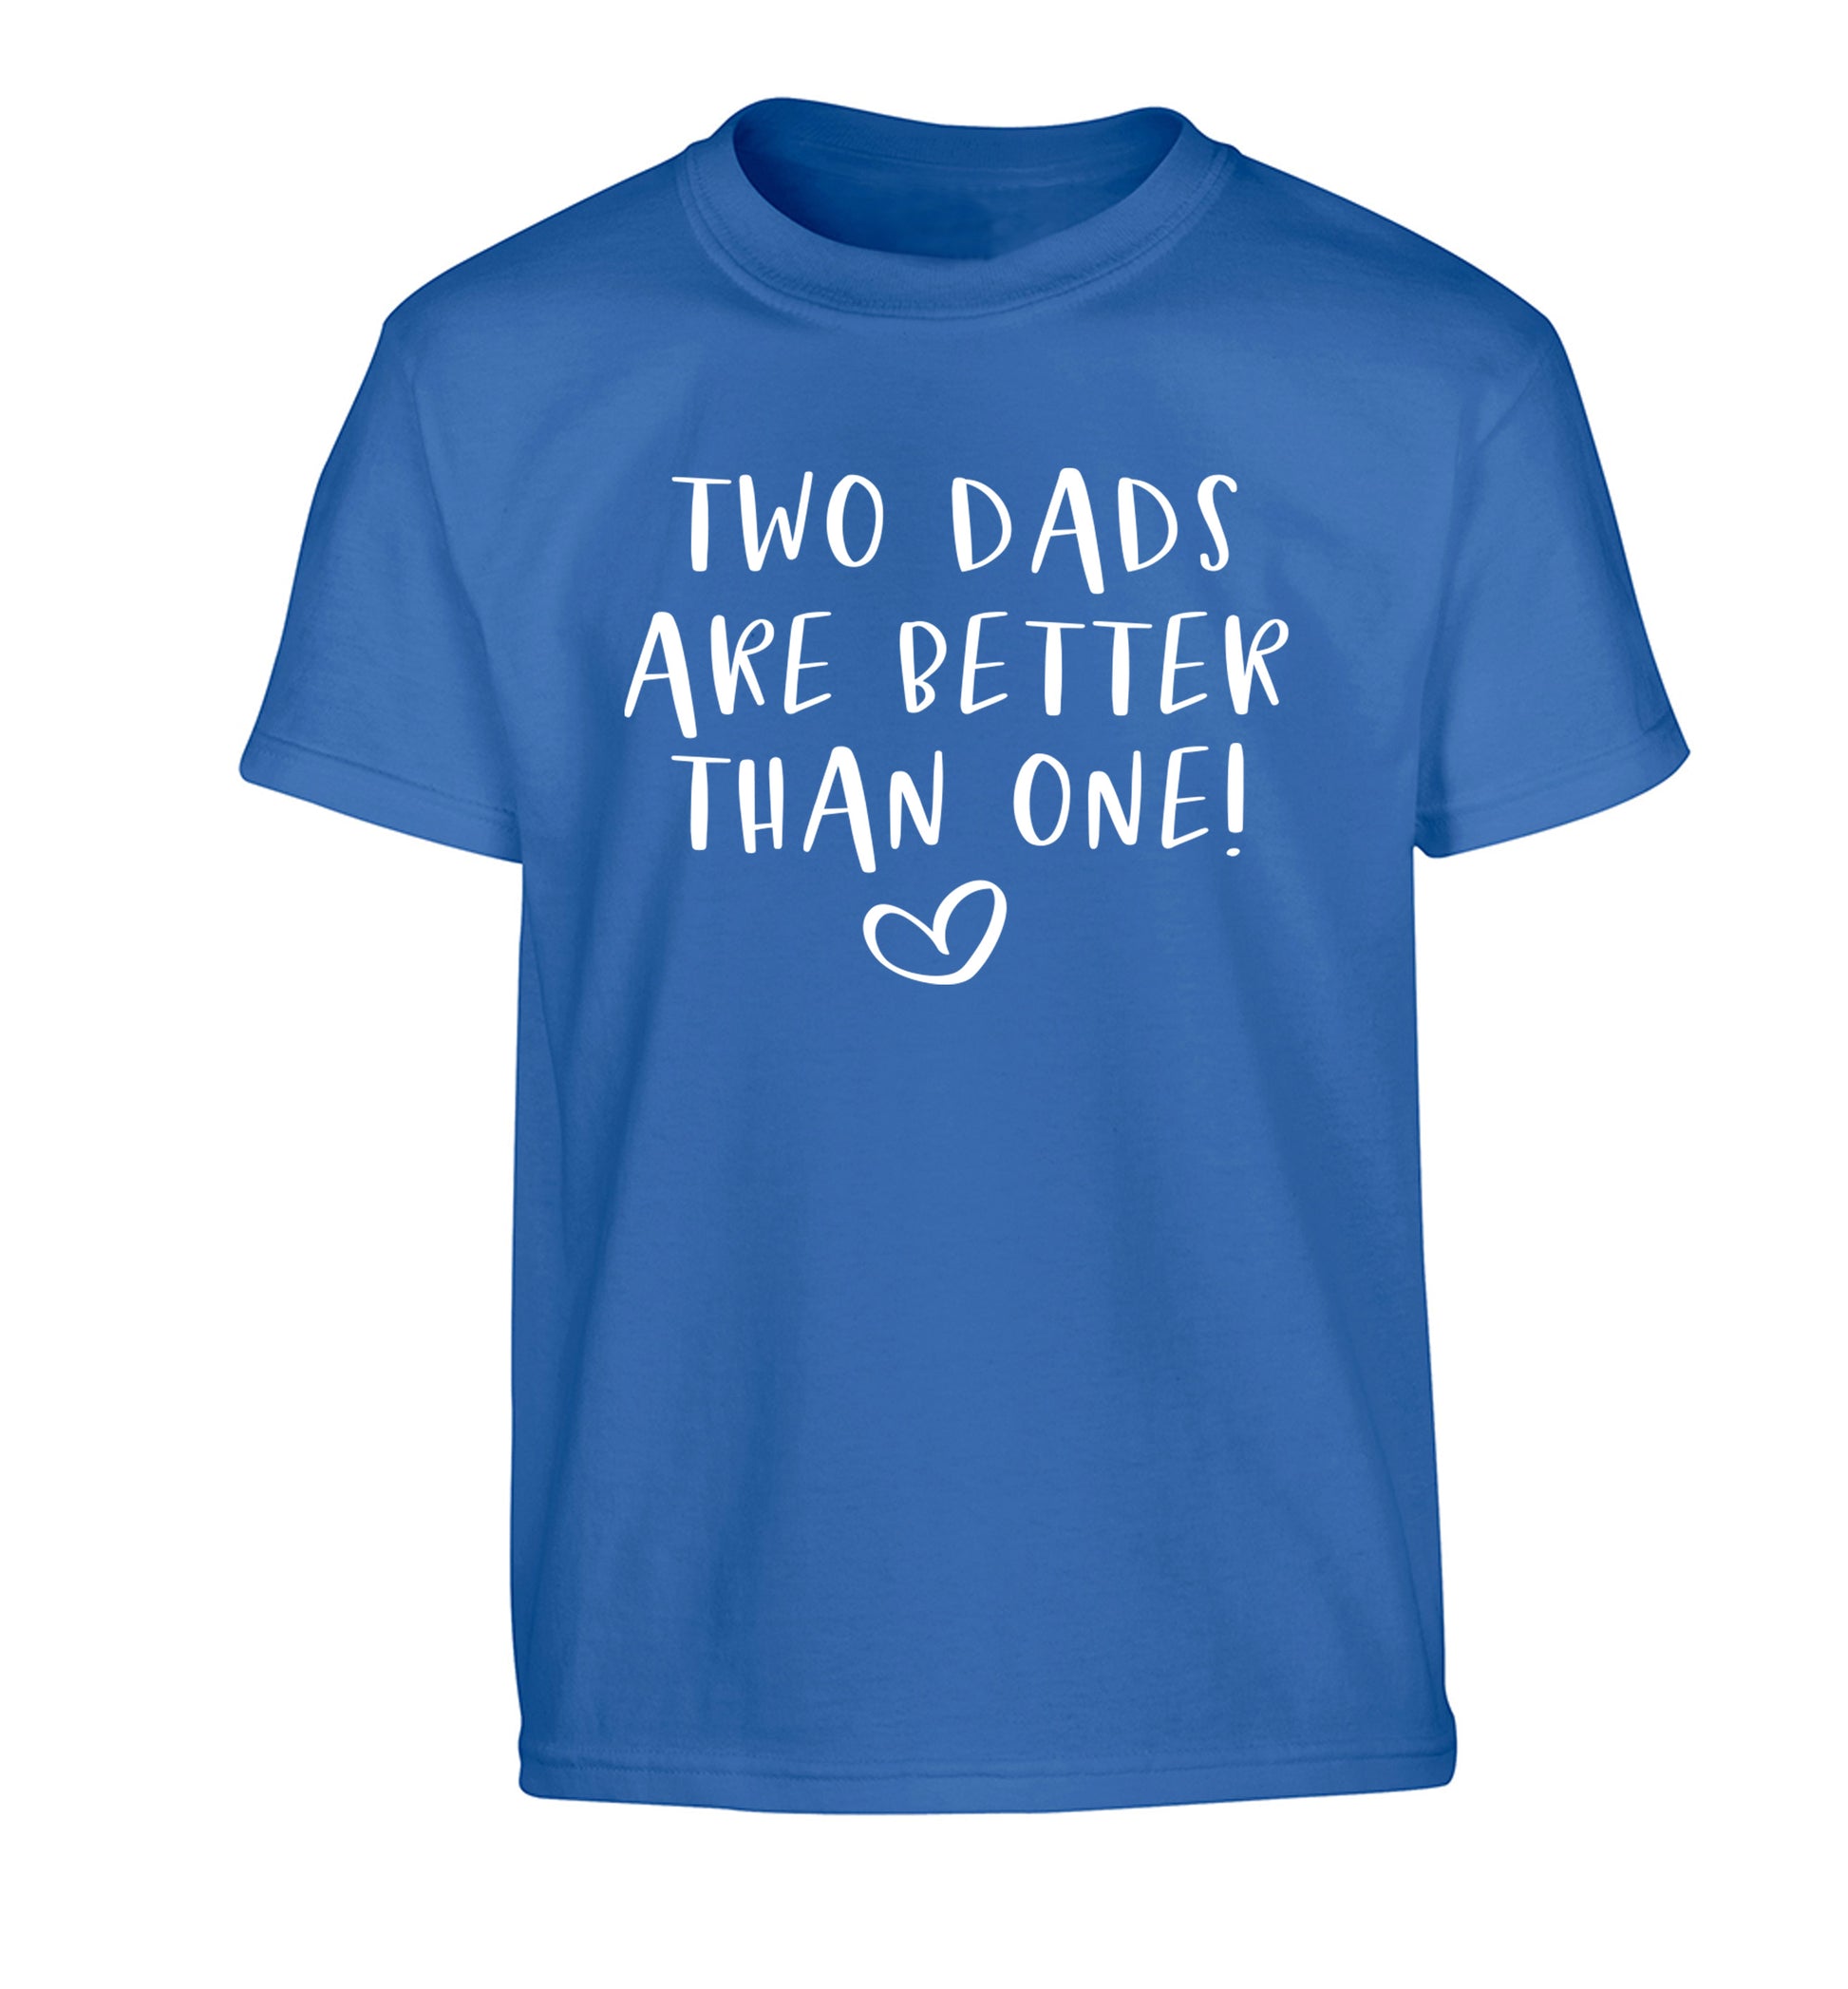 Two dads are better than one Children's blue Tshirt 12-13 Years